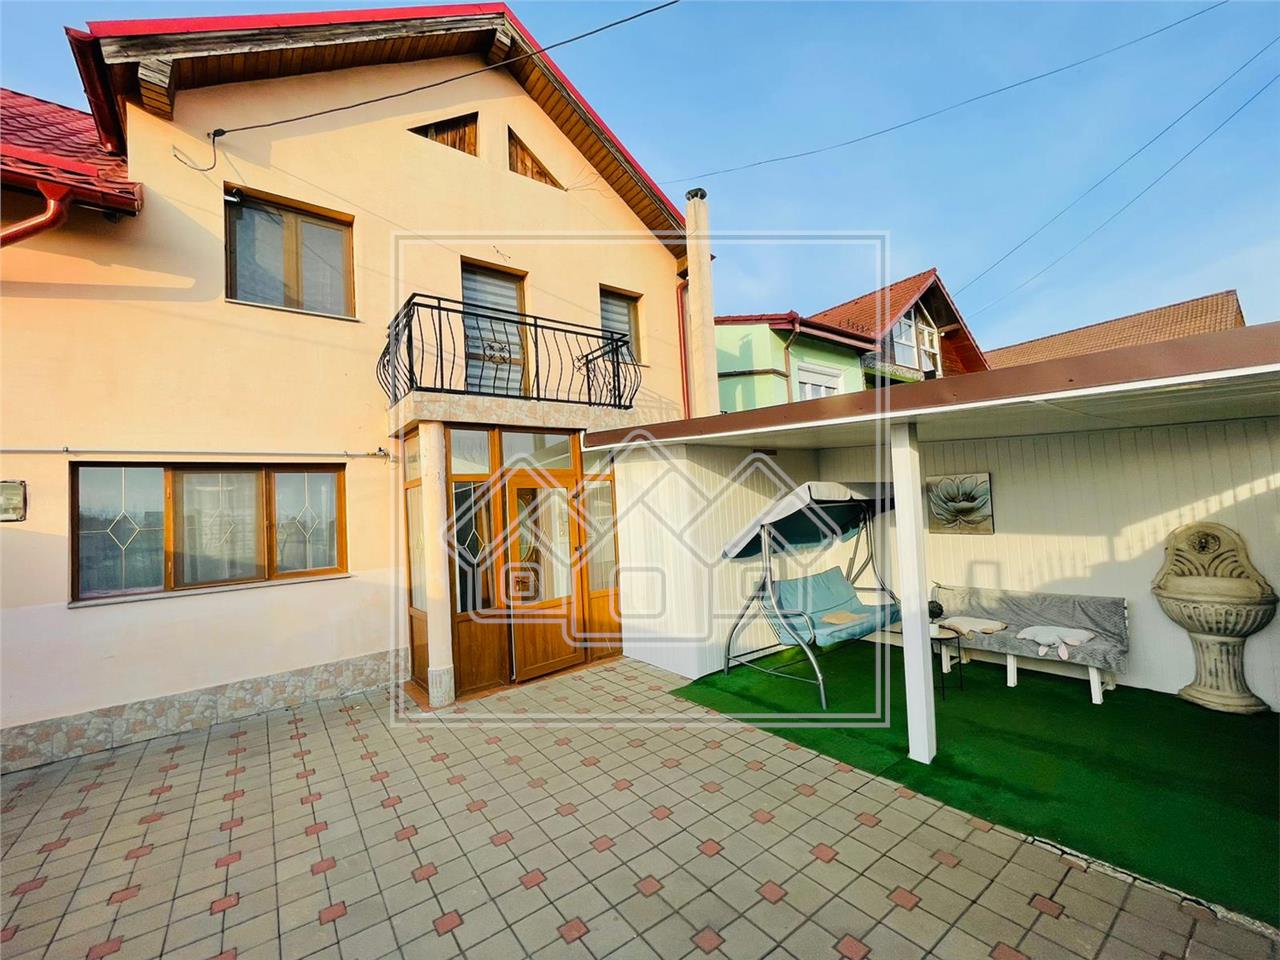 House for sale in Sibiu - duplex type - 124 sqm usable